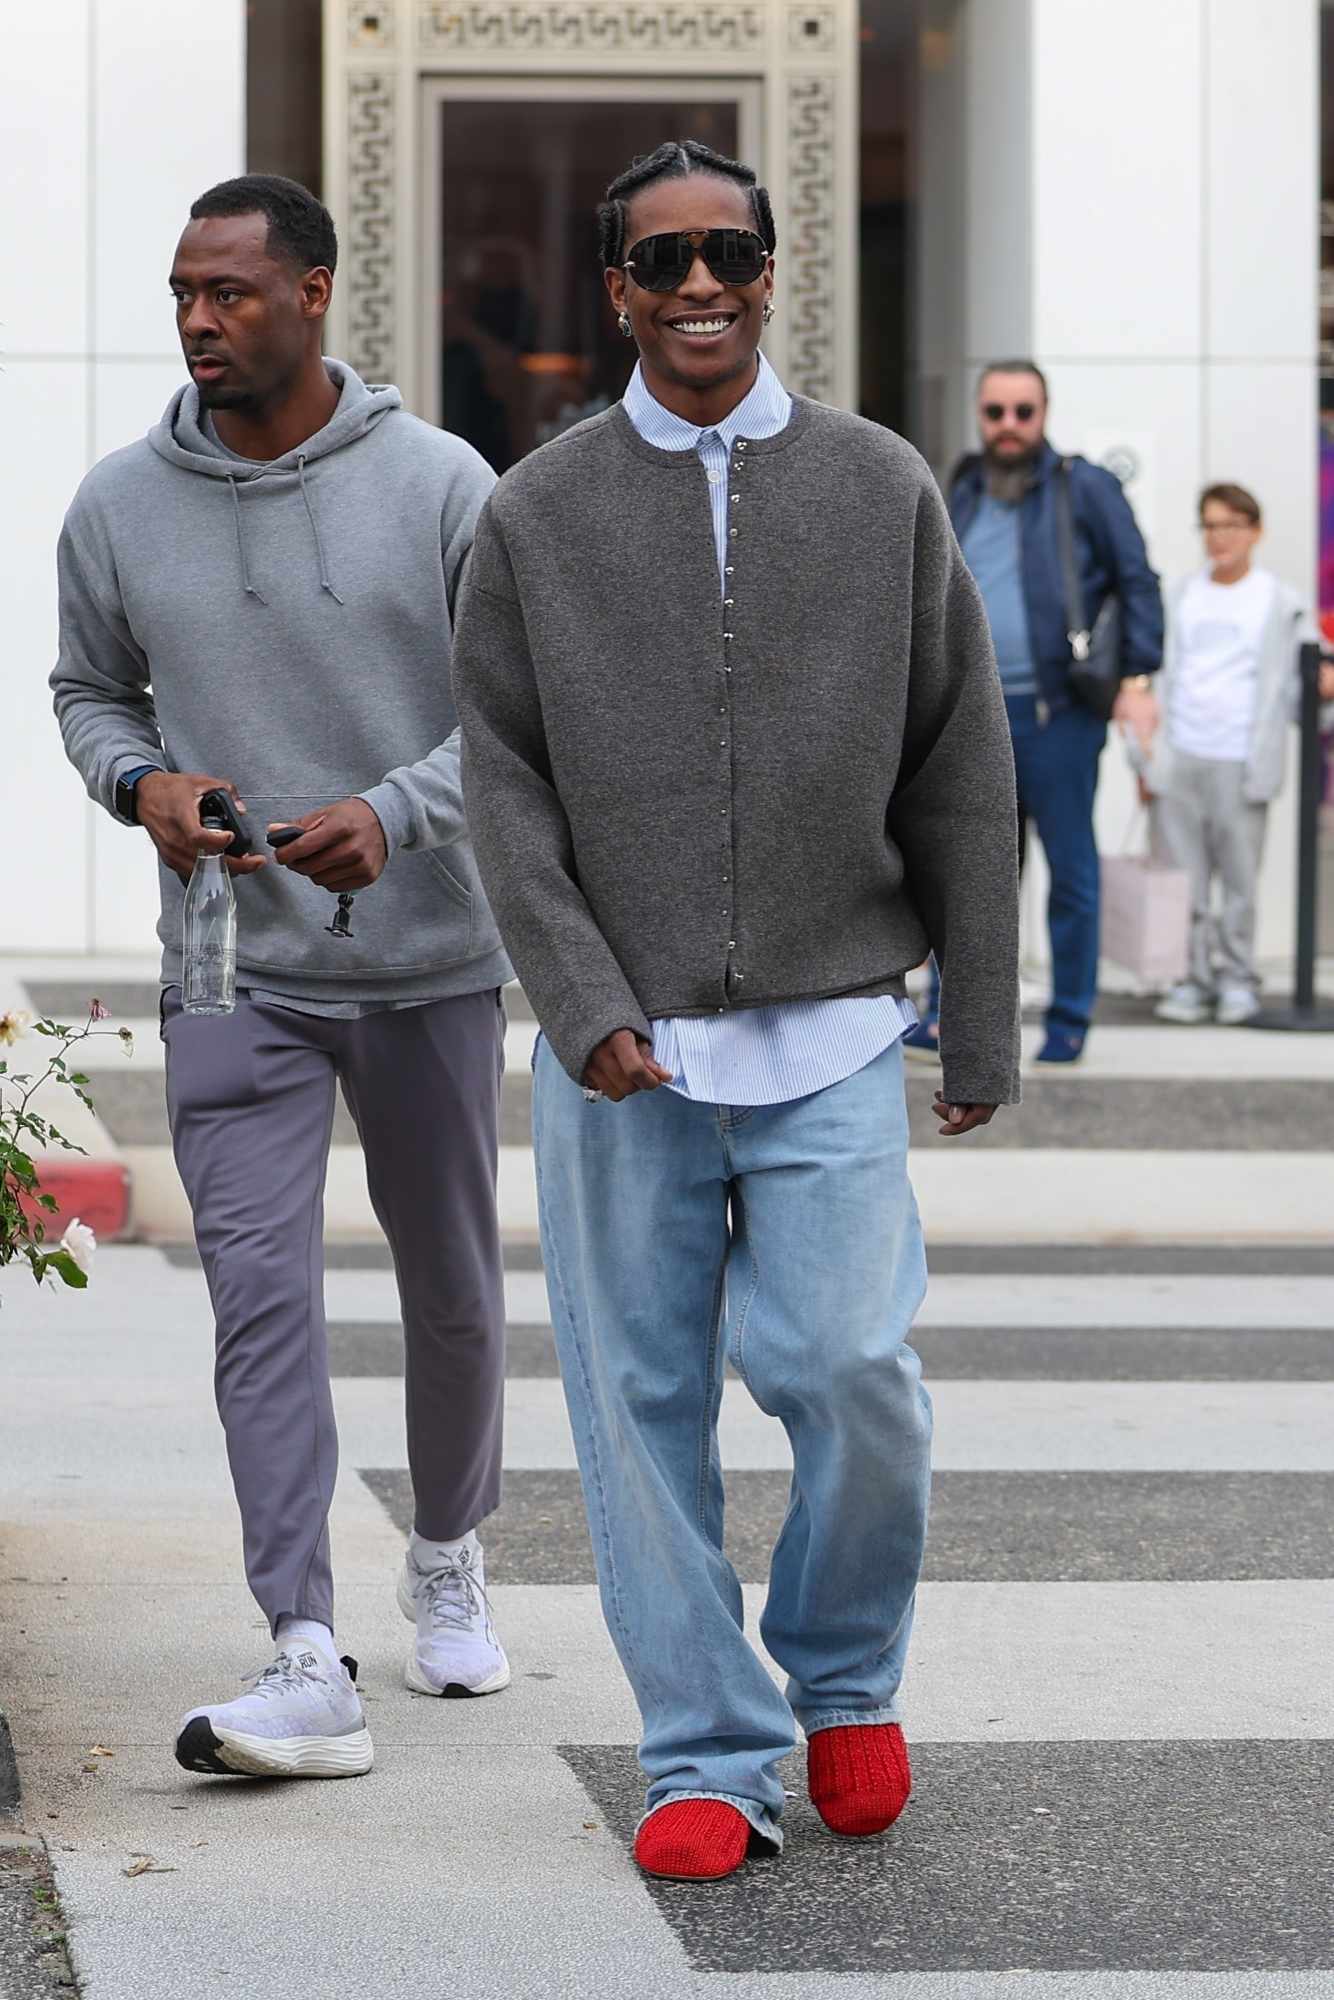 A$AP Rocky wears a grey cardigan, blue shirt, denim jeans, and red leather sock shoes